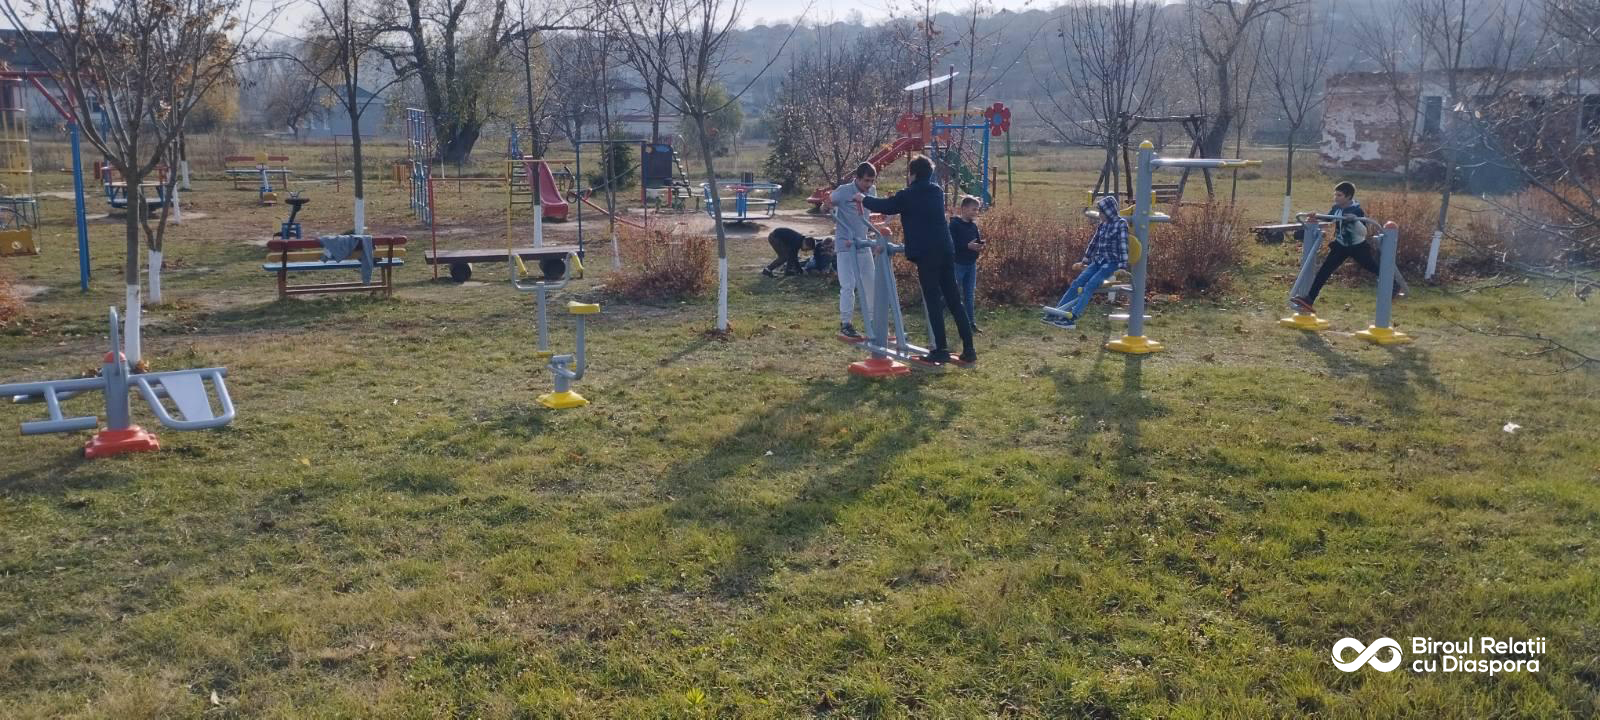 Realization of the DEH project „Outdoor sport”, At home at Boghiceni"